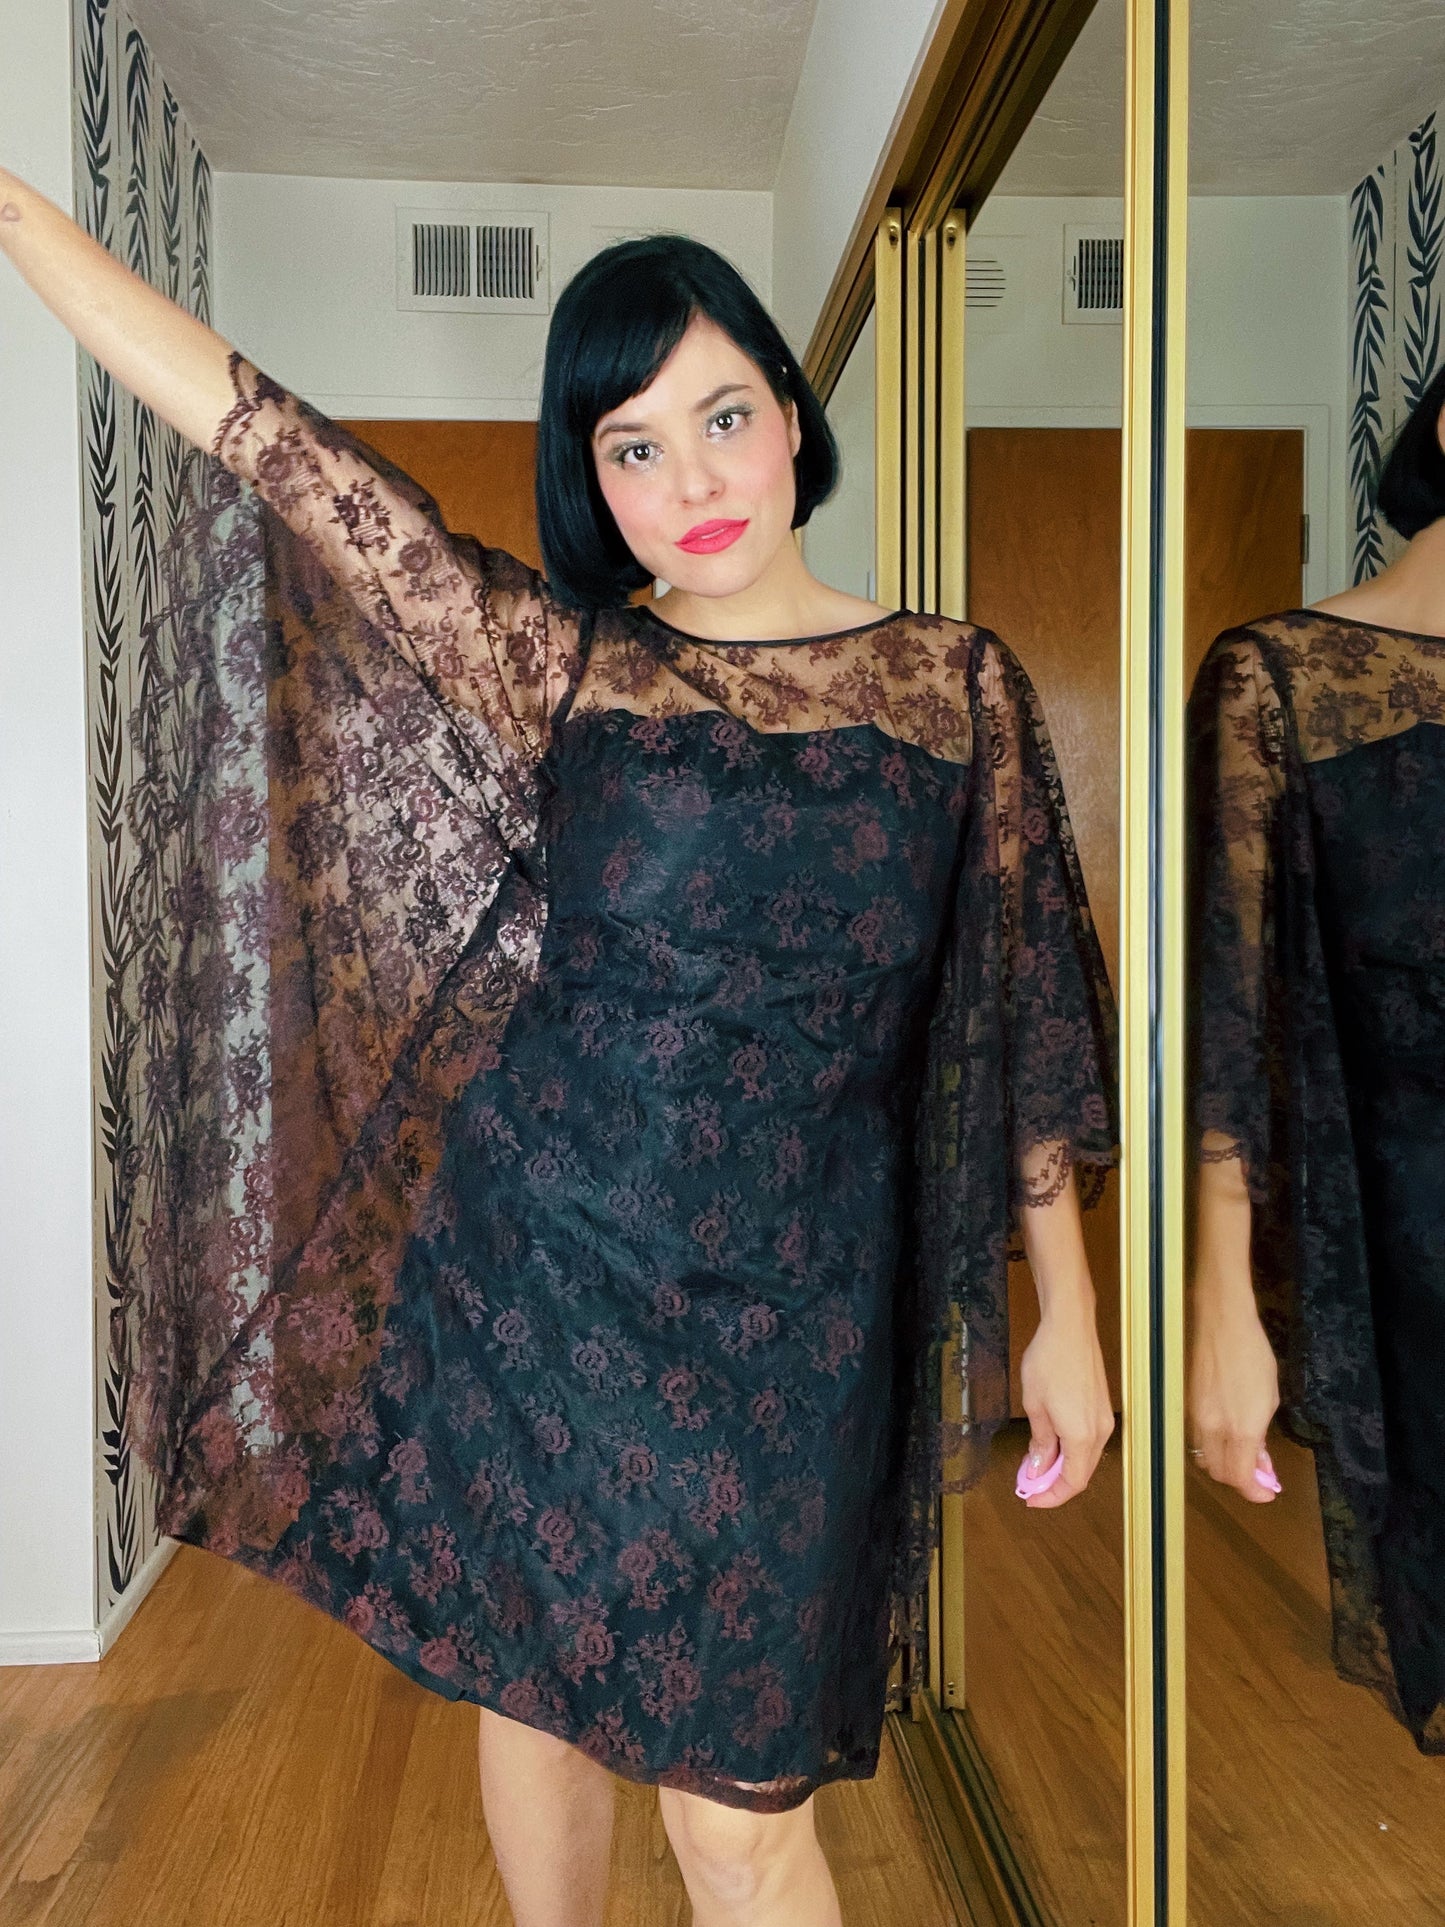 Vintage 60s Batwing Lace Overlay Dress Fits Sizes XS-SM & Possible Size M